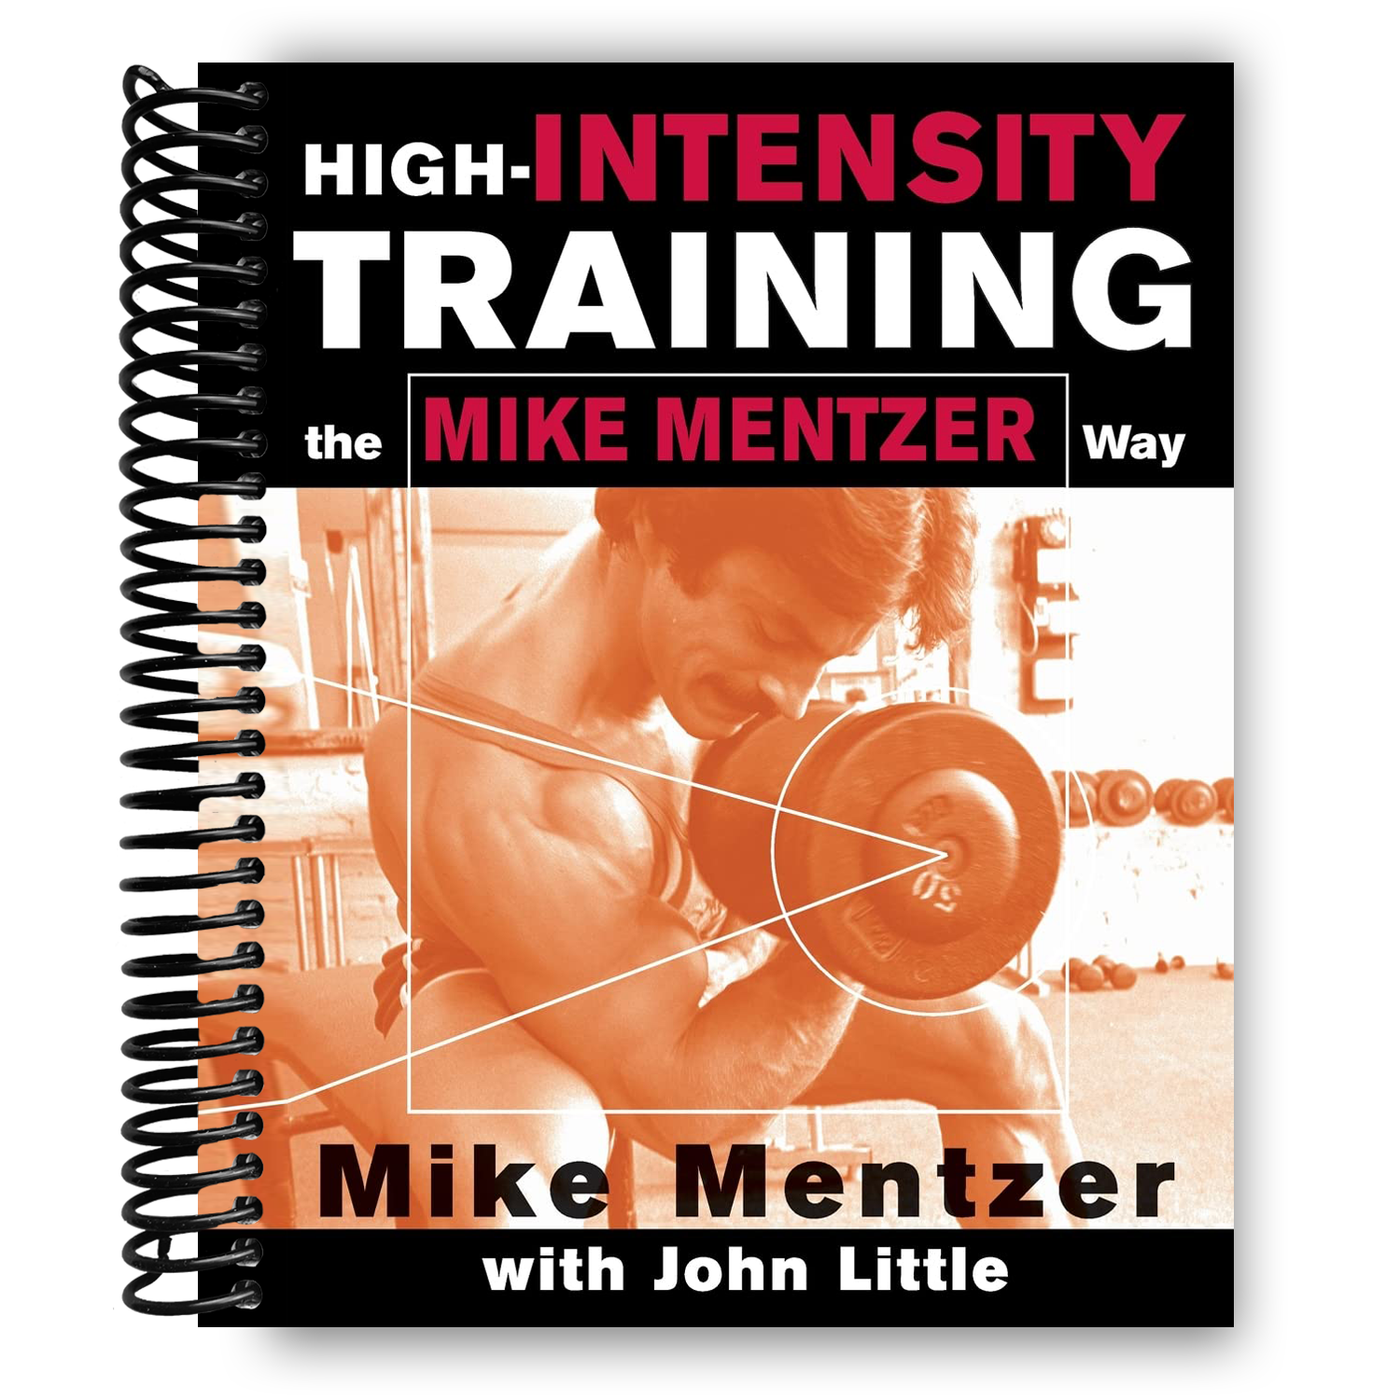 High-Intensity Training the Mike Mentzer Way (Spiral Bound)